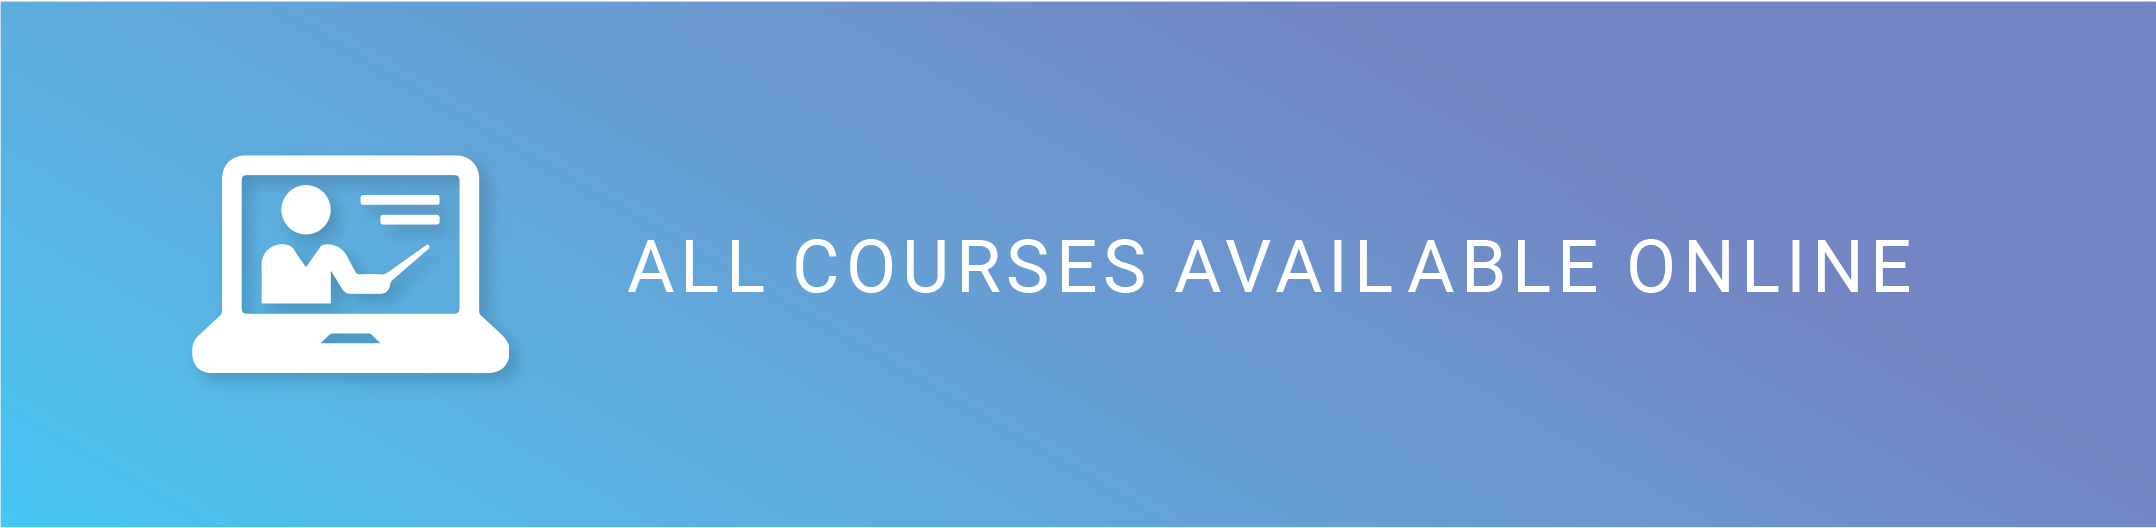 All-COURSES-AVAILABLE-ONLINE